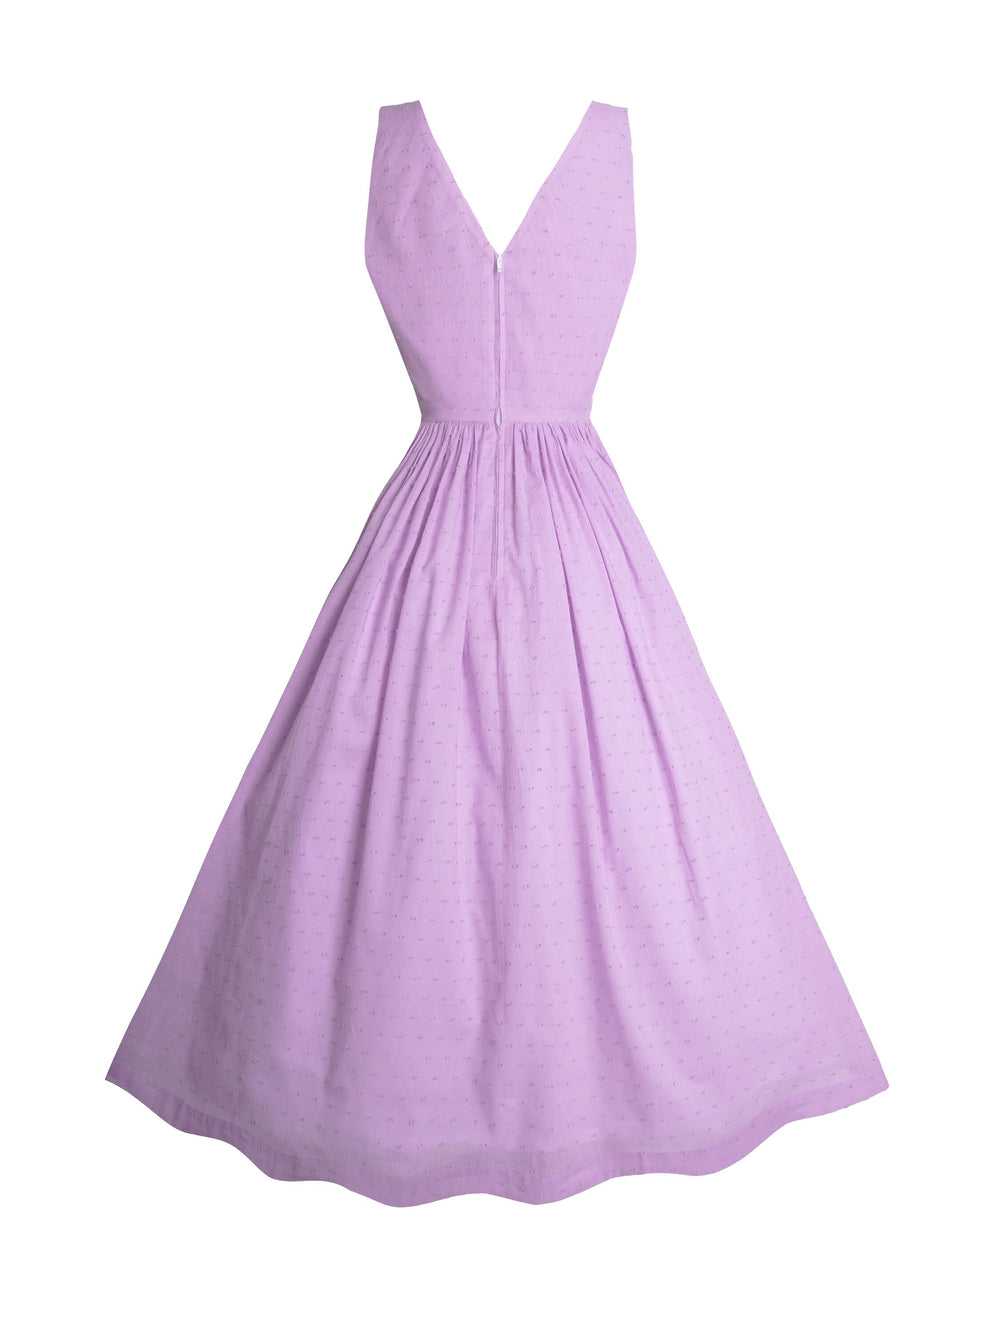 MTO - Diana Dress in Lavender "Dotted Swiss"